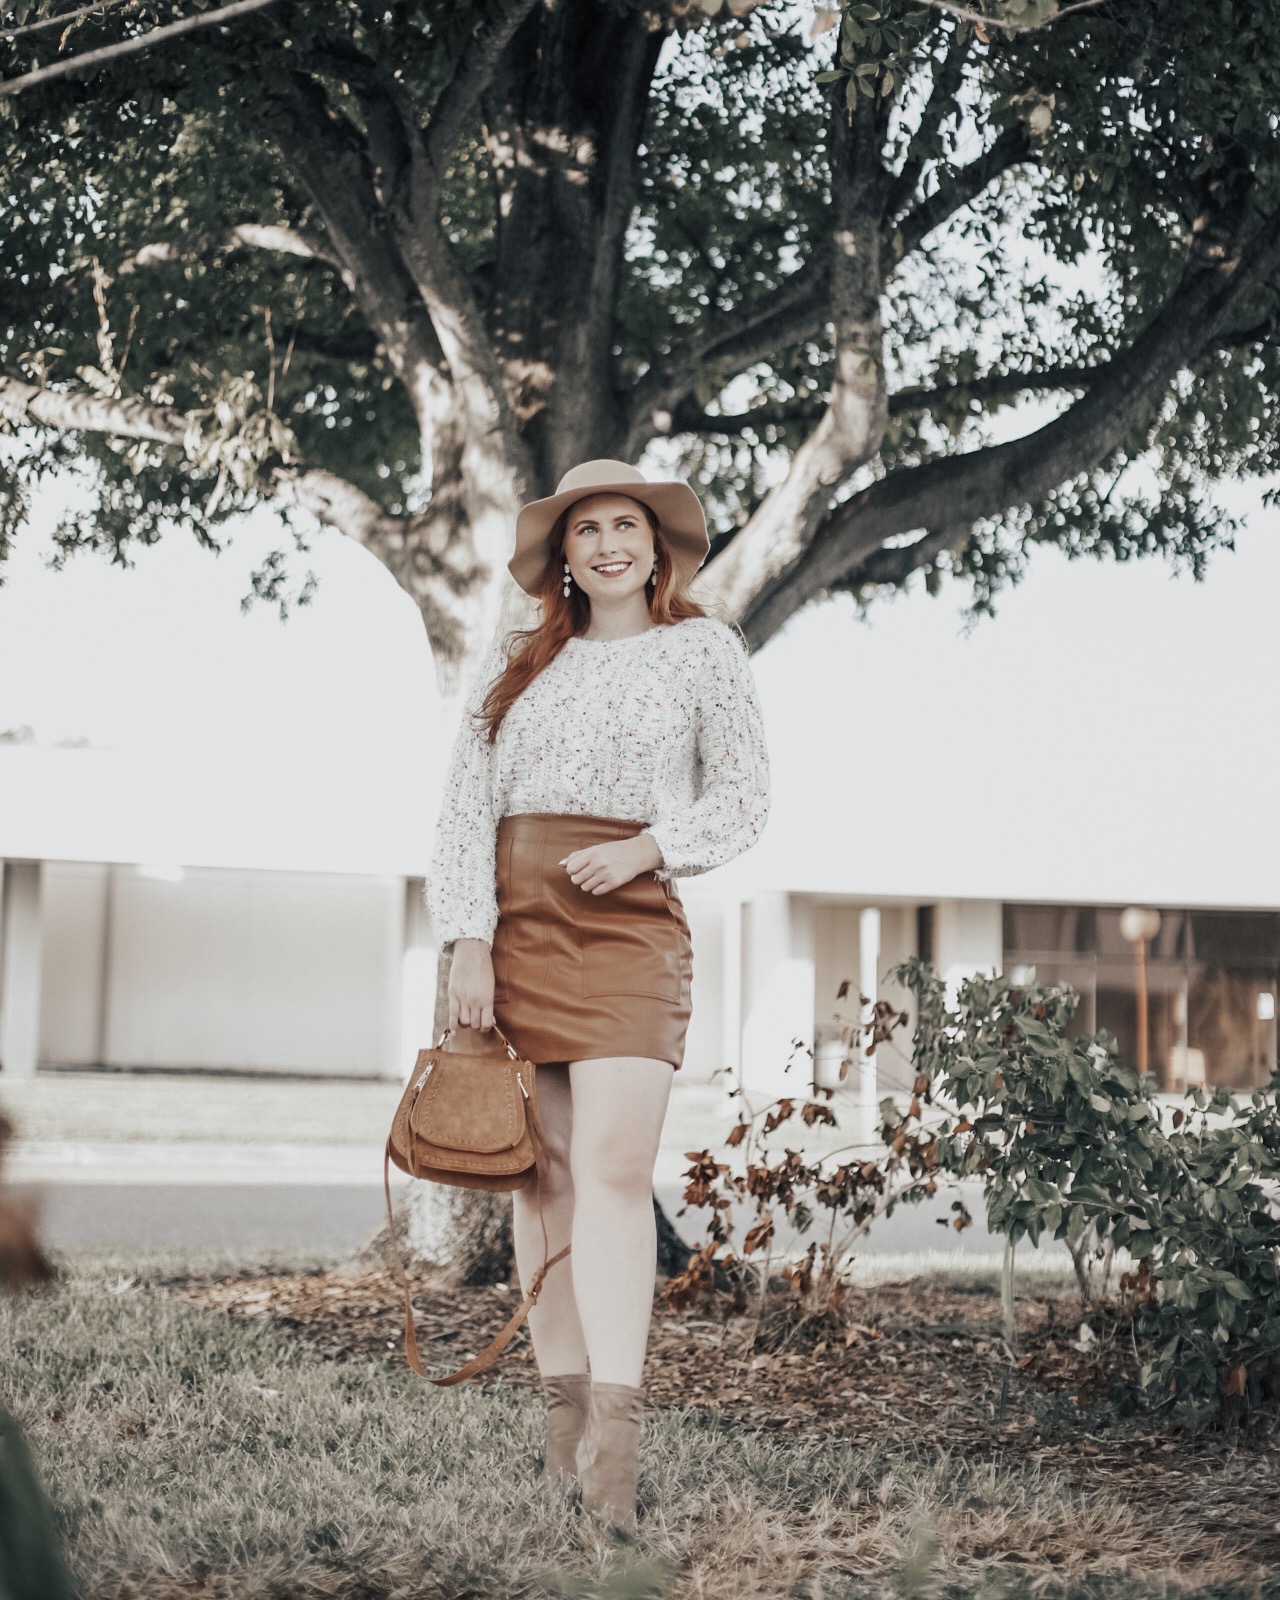 25+ Affordable Sweaters To Wear With Faux Leather Skirts | Affordable by Amanda, a Style Blog by Tampa Blogger Amanda Burrows | Wearing a Forever 21 Faux Leather Skirt and Francesca's Popcorn Sweater | Fall Outfit 2019